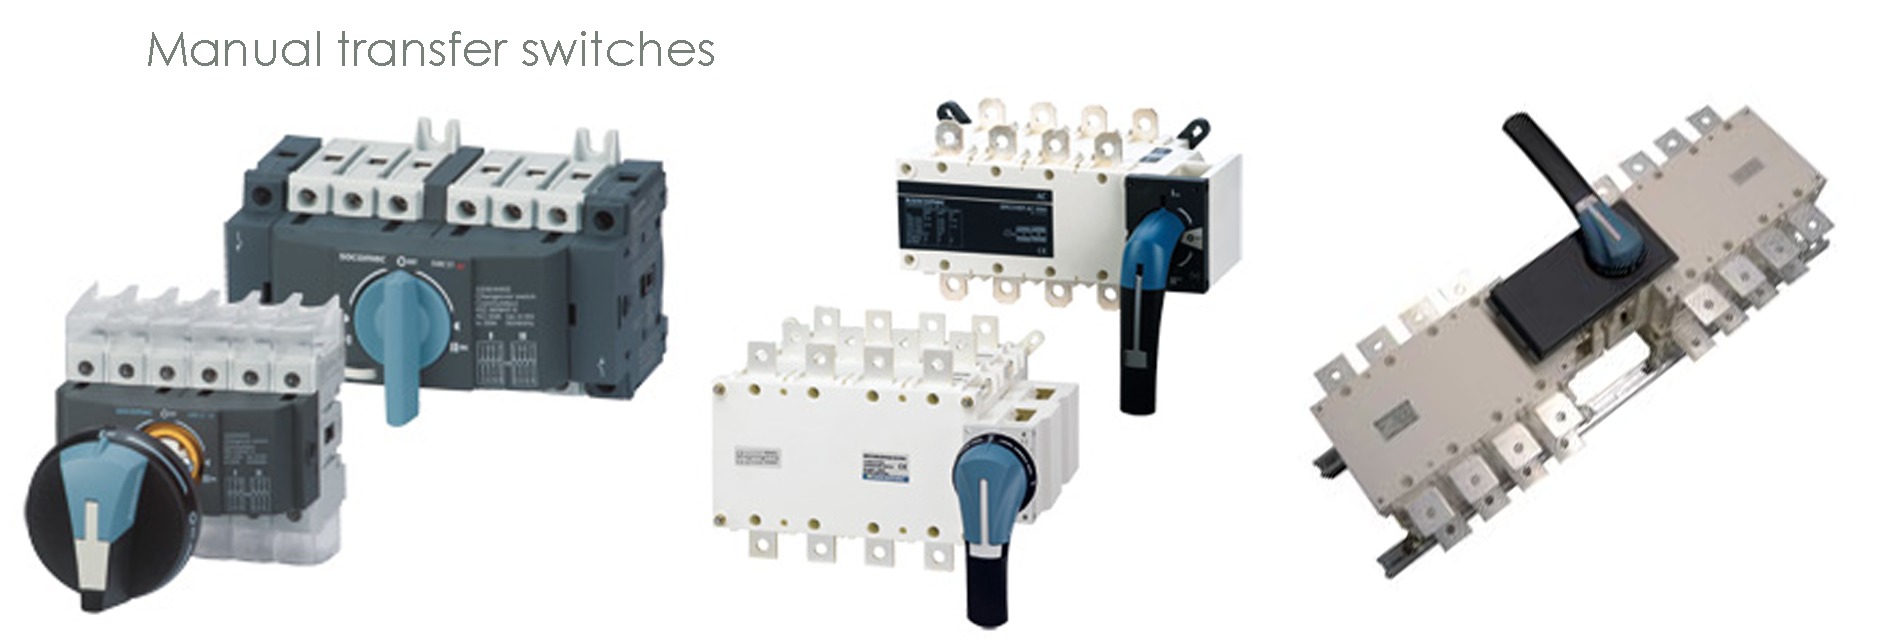 Manual transfer switches